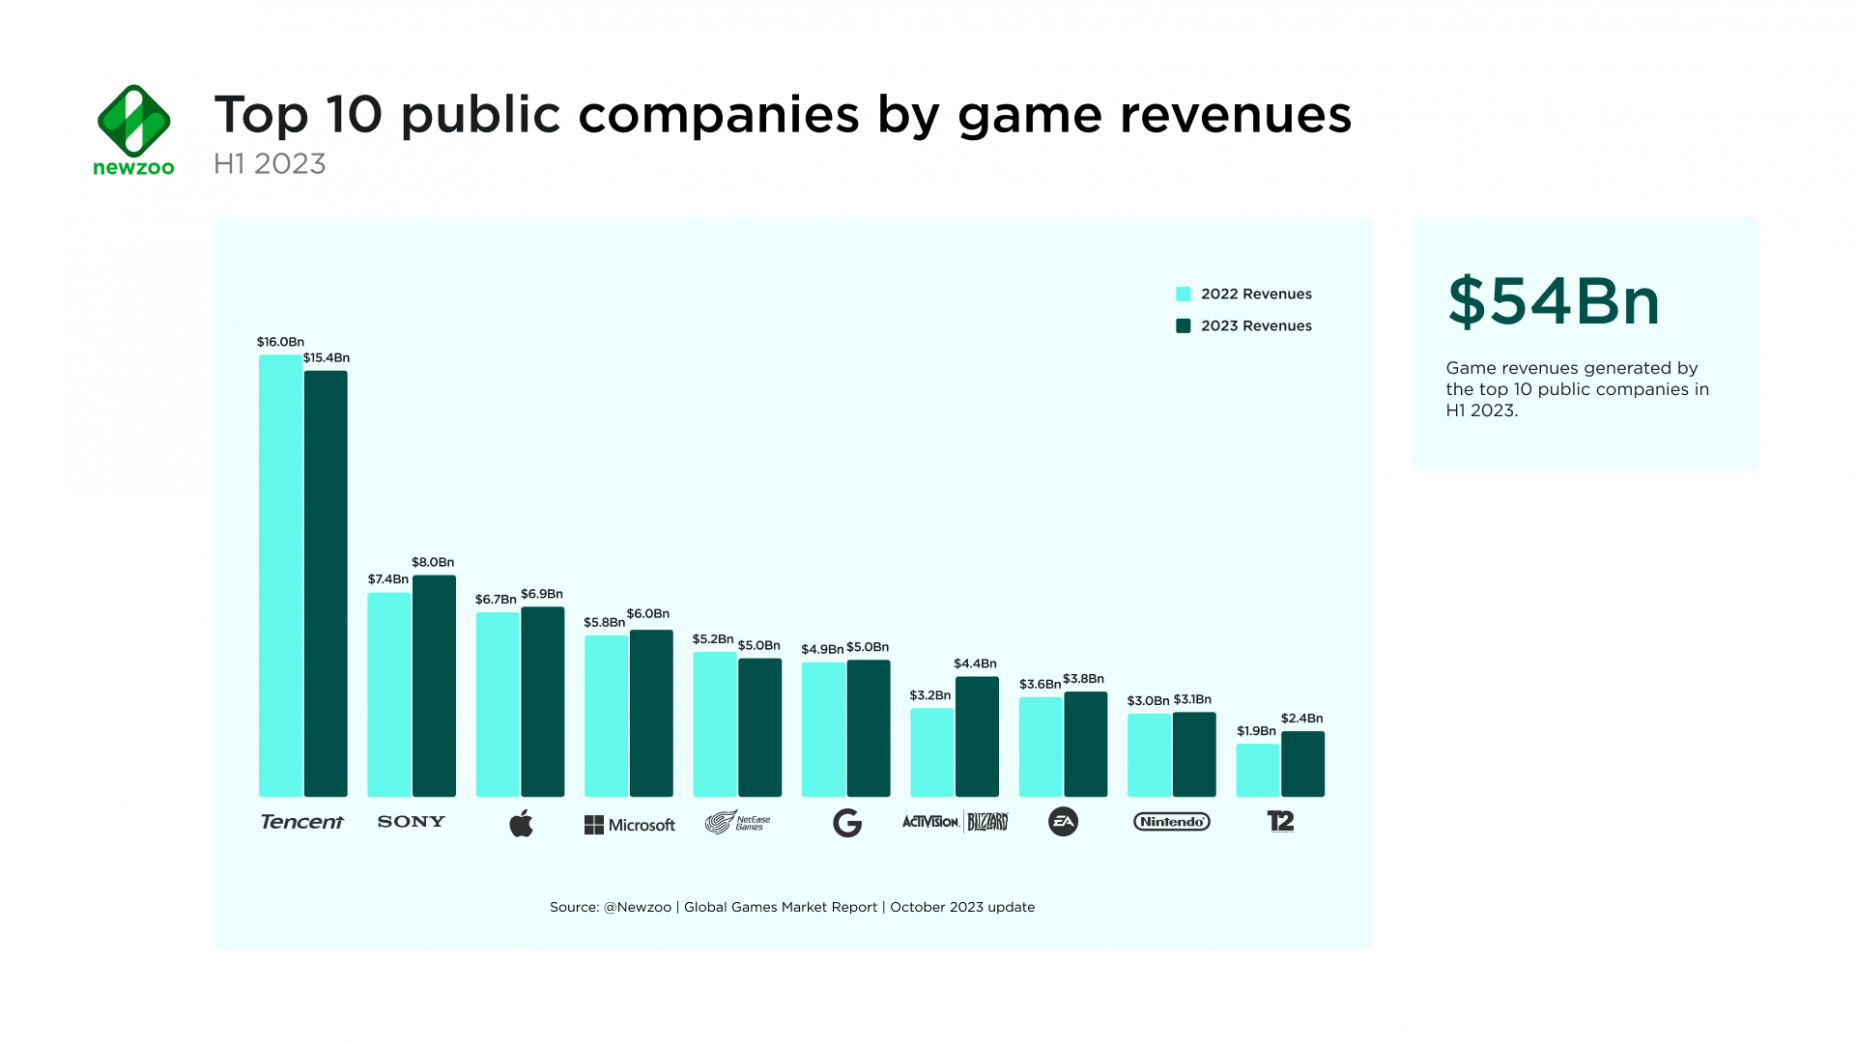 Revenues of gaming industry leaders, 2022 and 2023